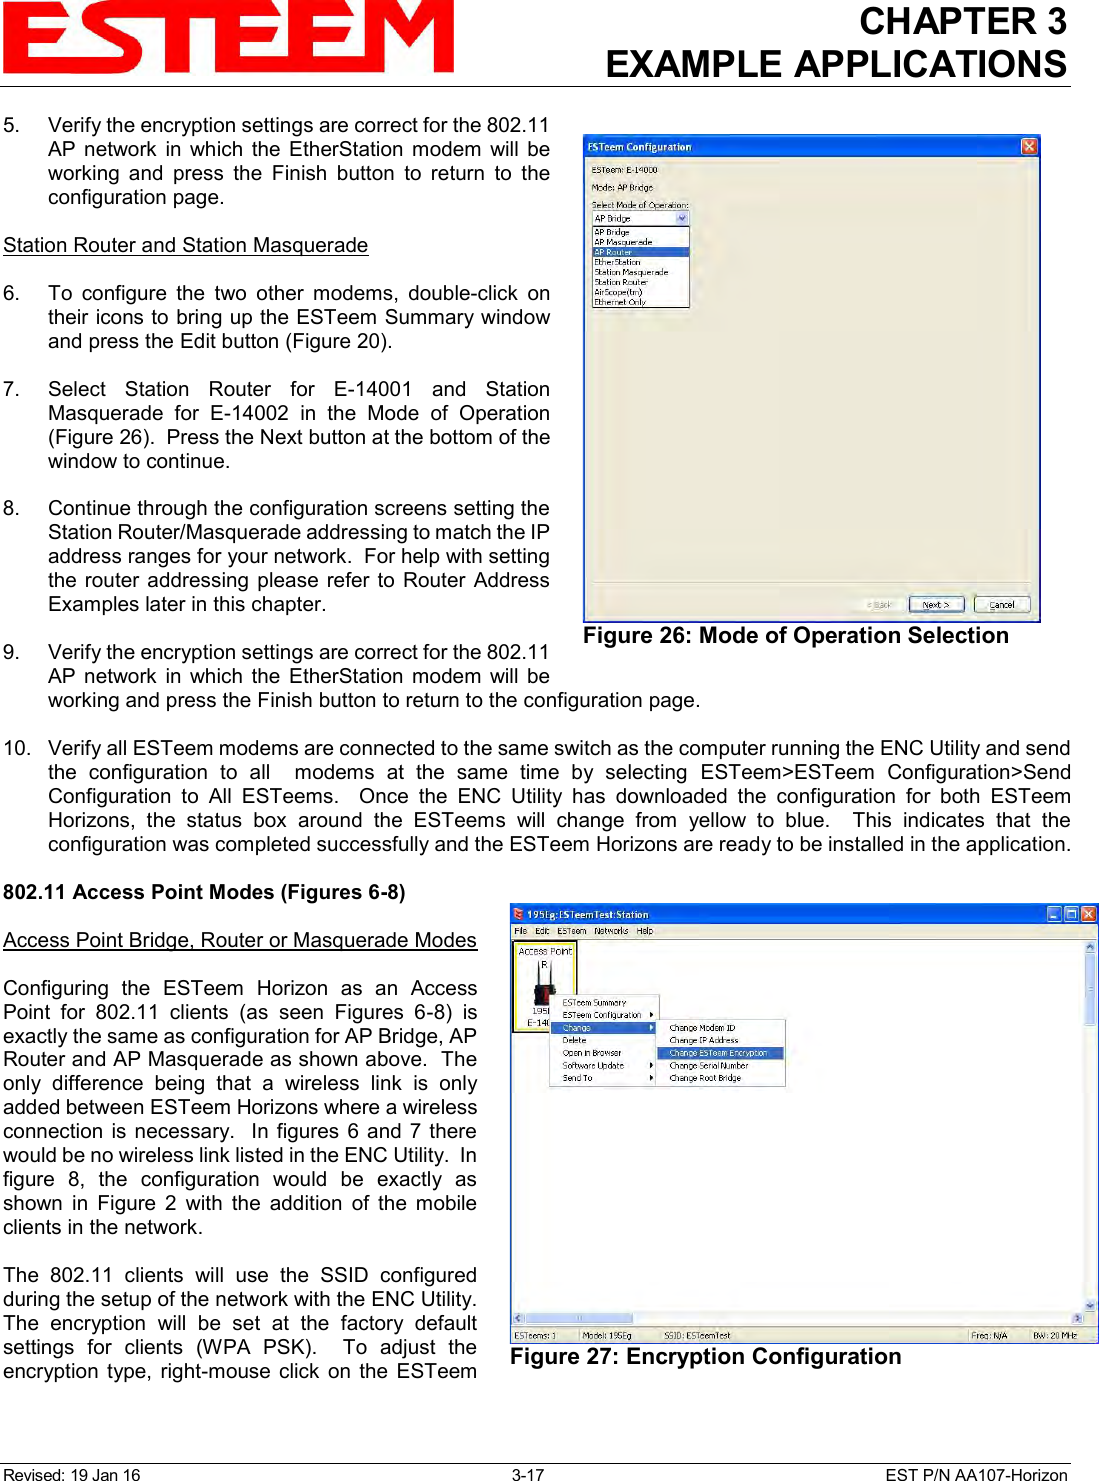 CHAPTER 3 EXAMPLE APPLICATIONS  Revised: 19 Jan 16  3-17  EST P/N AA107-Horizon 5.    Verify the encryption settings are correct for the 802.11 AP  network  in  which  the  EtherStation  modem  will  be working  and  press  the  Finish  button  to  return  to  the configuration page.  Station Router and Station Masquerade  6.    To  configure  the  two  other  modems,  double-click  on their icons to bring up the ESTeem Summary window and press the Edit button (Figure 20).   7.   Select  Station  Router  for  E-14001  and  Station Masquerade  for  E-14002  in  the  Mode  of  Operation (Figure 26).  Press the Next button at the bottom of the window to continue.    8.    Continue through the configuration screens setting the Station Router/Masquerade addressing to match the IP address ranges for your network.  For help with setting the router  addressing  please  refer to  Router  Address Examples later in this chapter.  9.    Verify the encryption settings are correct for the 802.11 AP  network  in  which  the  EtherStation  modem  will  be working and press the Finish button to return to the configuration page.  10.   Verify all ESTeem modems are connected to the same switch as the computer running the ENC Utility and send the  configuration  to  all    modems  at  the  same  time  by  selecting  ESTeem&gt;ESTeem  Configuration&gt;Send Configuration  to  All  ESTeems.    Once  the  ENC  Utility  has  downloaded  the  configuration  for  both  ESTeem Horizons,  the  status  box  around  the  ESTeems  will  change  from  yellow  to  blue.    This  indicates  that  the configuration was completed successfully and the ESTeem Horizons are ready to be installed in the application.  802.11 Access Point Modes (Figures 6-8)  Access Point Bridge, Router or Masquerade Modes  Configuring  the  ESTeem  Horizon  as  an  Access Point  for  802.11  clients  (as  seen  Figures  6-8)  is exactly the same as configuration for AP Bridge, AP Router and AP Masquerade as shown above.  The only  difference  being  that  a  wireless  link  is  only added between ESTeem Horizons where a wireless connection  is  necessary.  In  figures  6 and 7 there would be no wireless link listed in the ENC Utility.  In figure  8,  the  configuration  would  be  exactly  as shown  in  Figure  2  with  the  addition  of  the  mobile clients in the network.  The  802.11  clients  will  use  the  SSID  configured during the setup of the network with the ENC Utility. The  encryption  will  be  set  at  the  factory  default settings  for  clients  (WPA  PSK).    To  adjust  the encryption  type,  right-mouse  click  on  the  ESTeem  Figure 26: Mode of Operation Selection   Figure 27: Encryption Configuration  